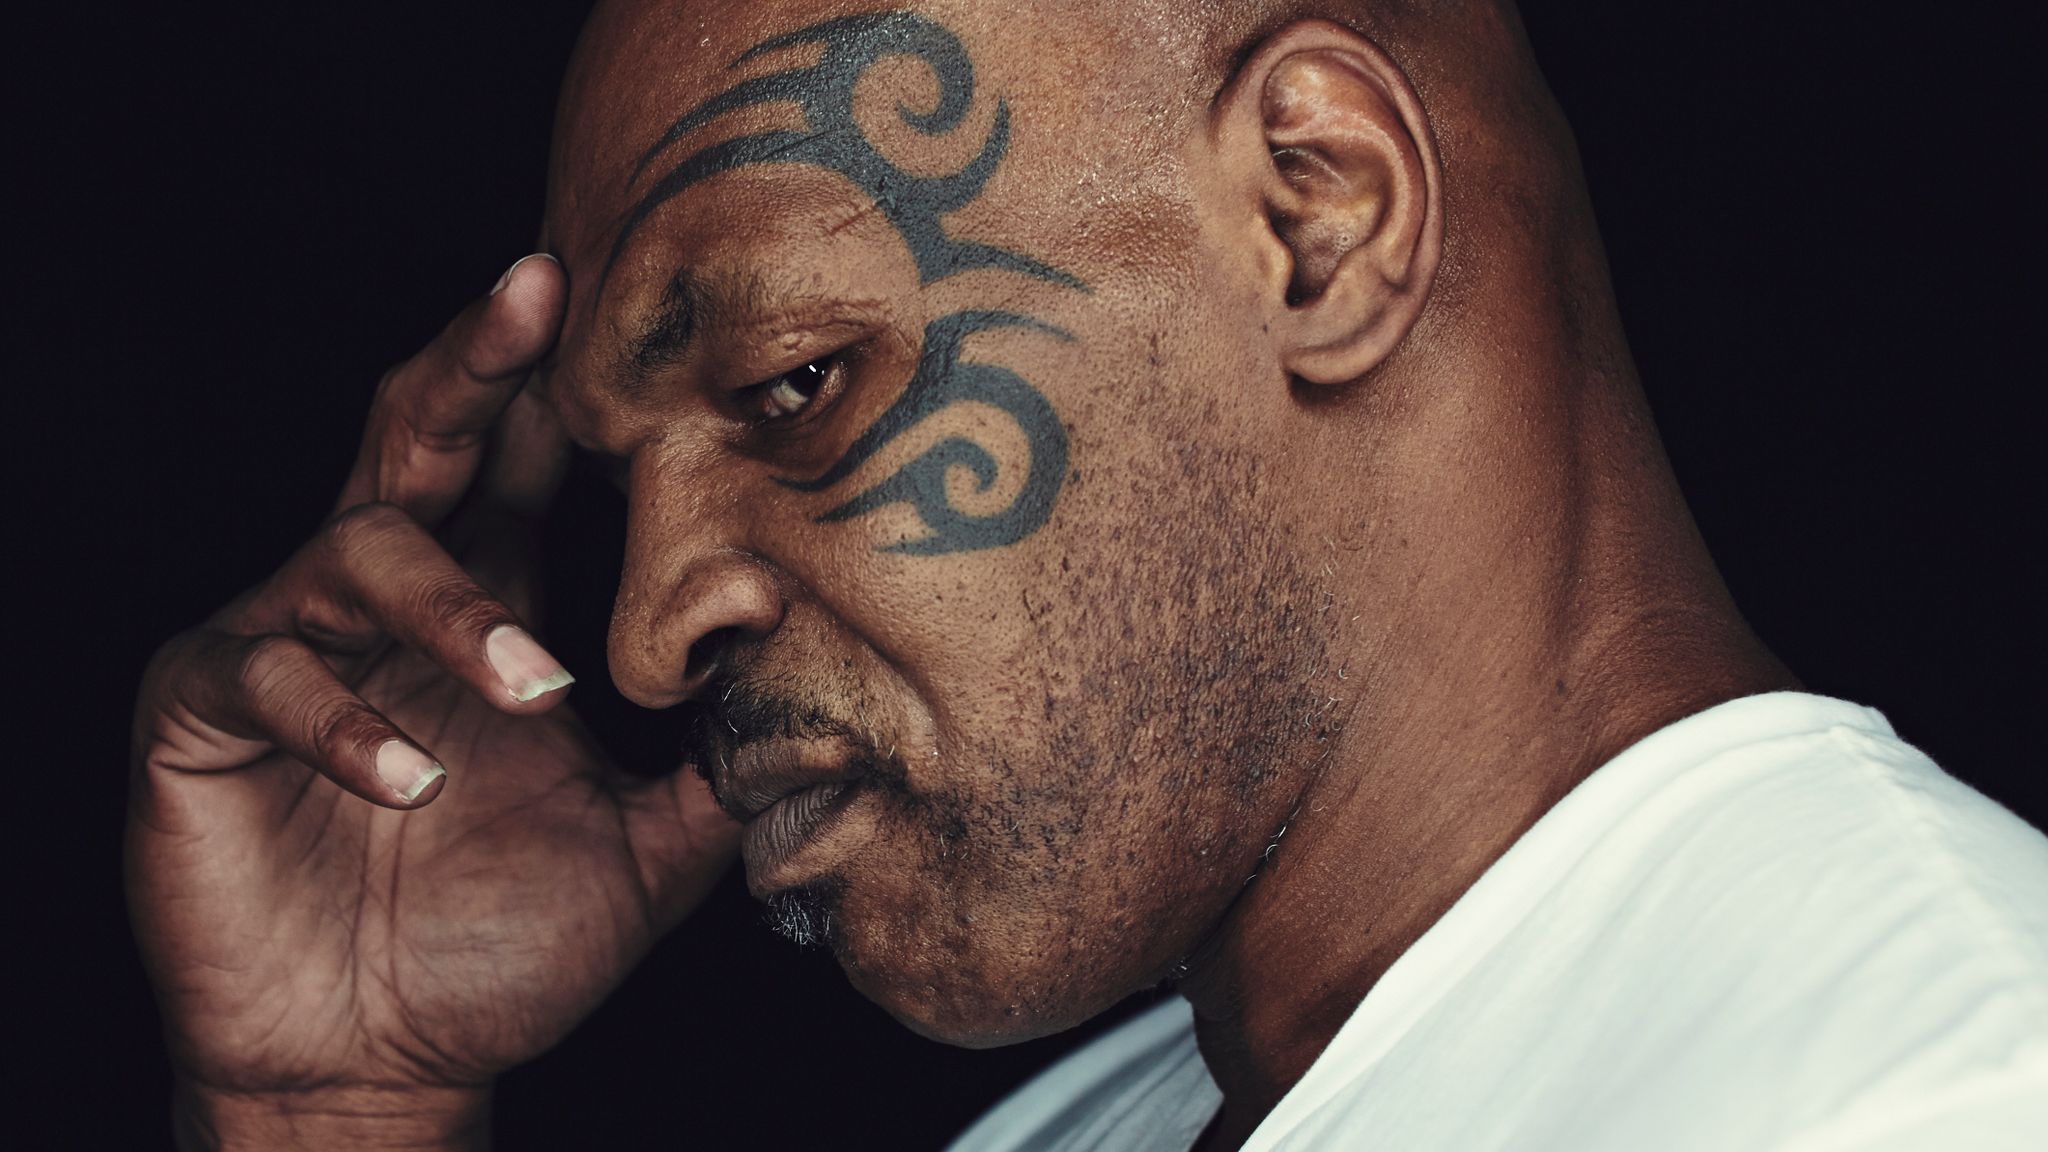 Lost Picture of Mike Tyson Getting the Iconic Face Tattoo Resurfaces   EssentiallySports